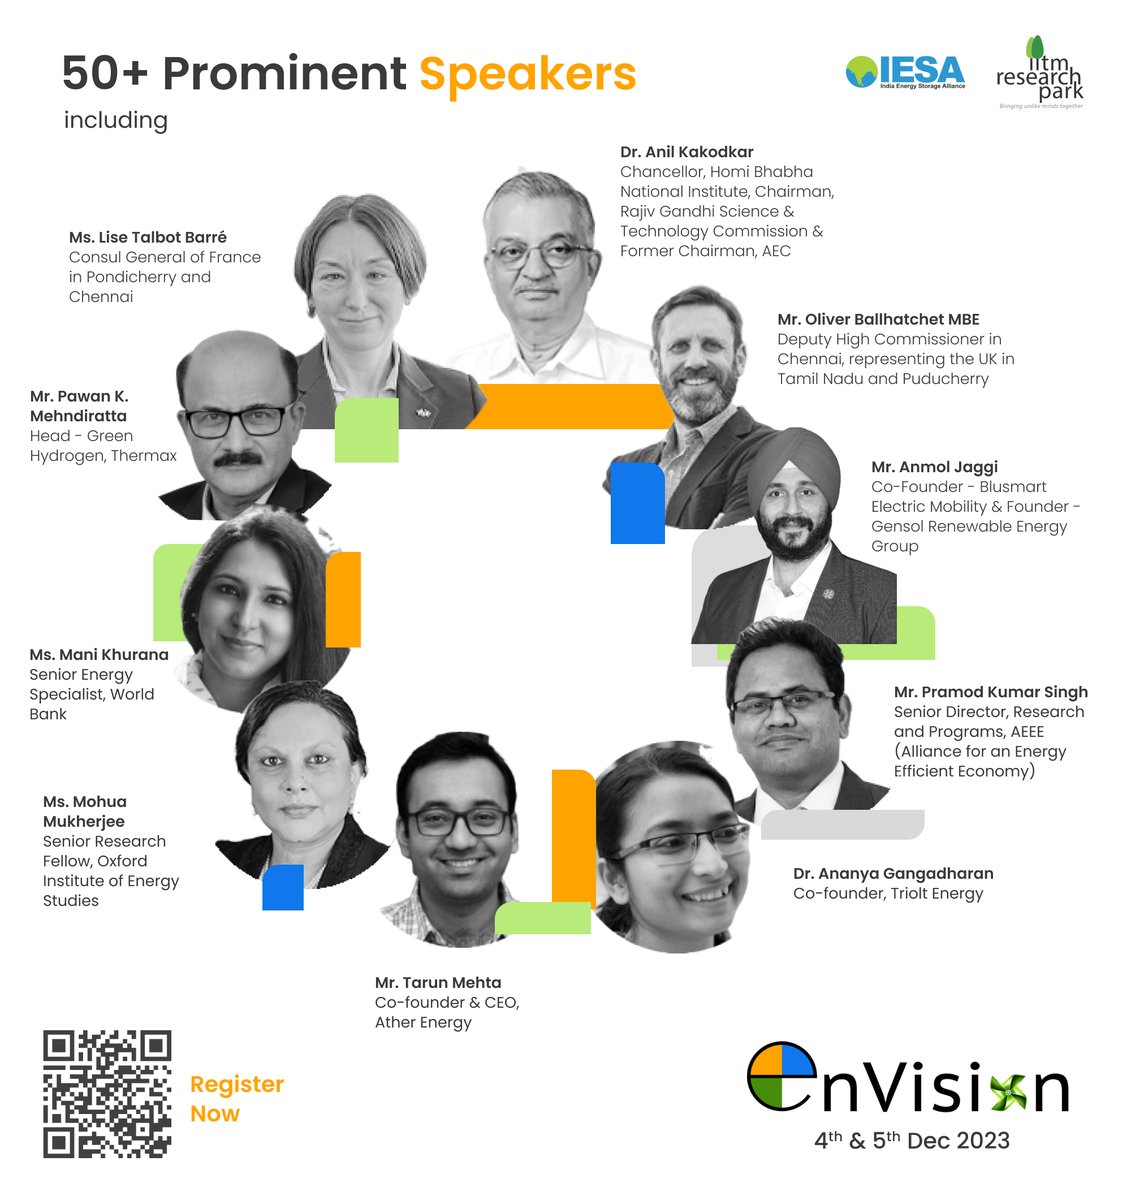 Get ready to be inspired by these thought leaders at EnVision 2023, as they engage us in thought-provoking discussions, share transformative ideas & drive action towards a cleaner, more sustainable future for India! Know more & register now👉bit.ly/3u1CMRC